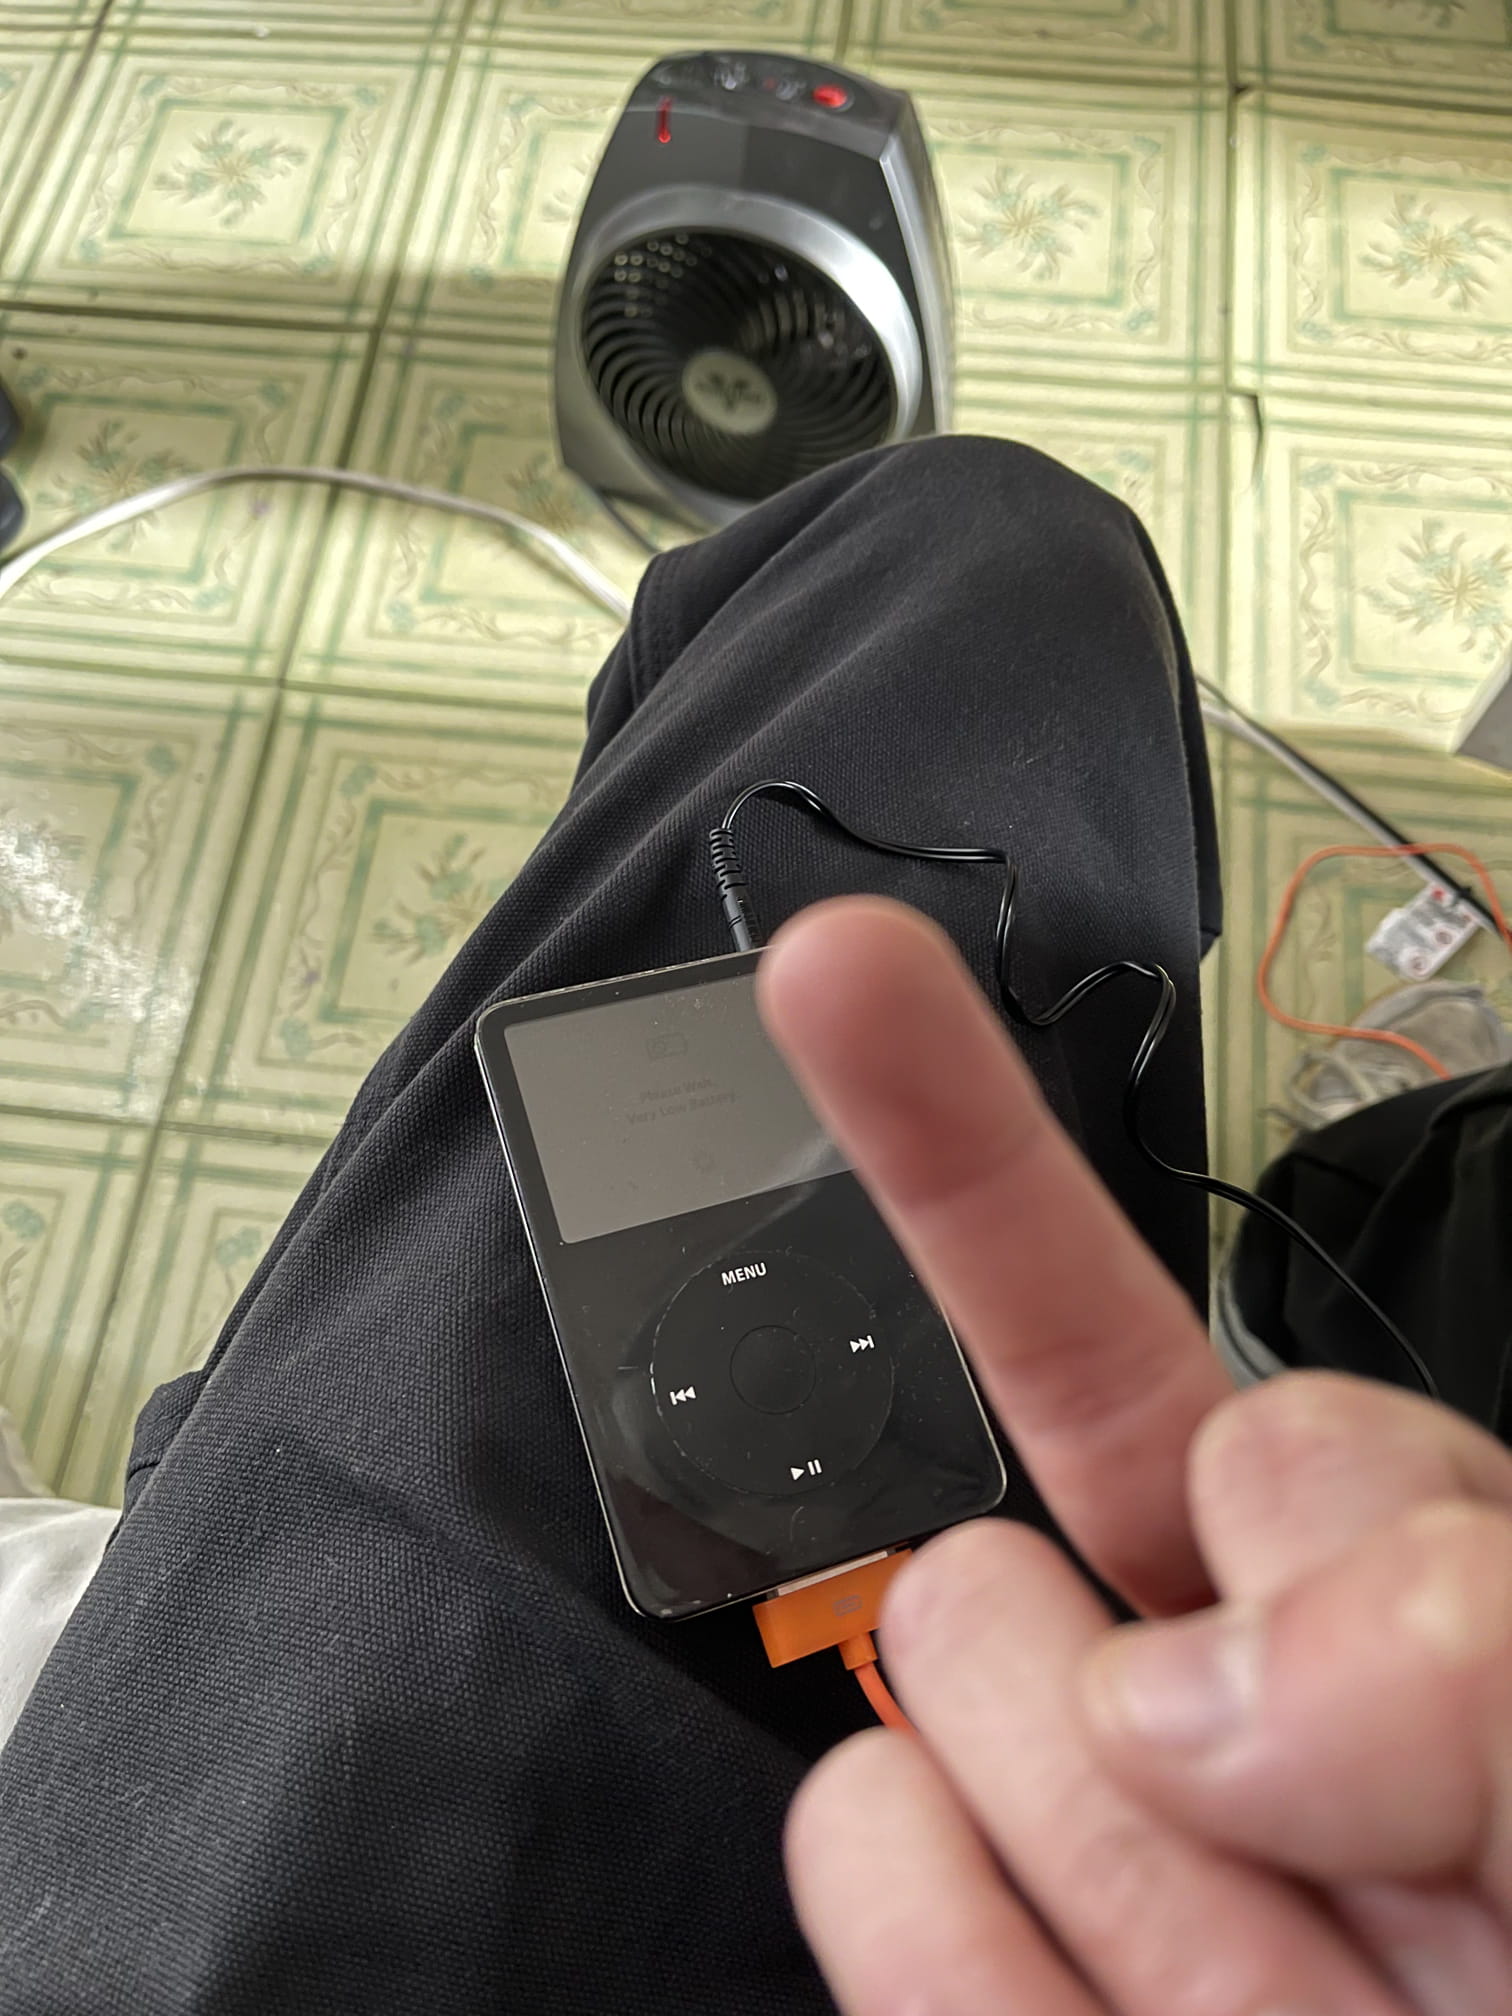 I bought this fucking ipod and it barely turns on